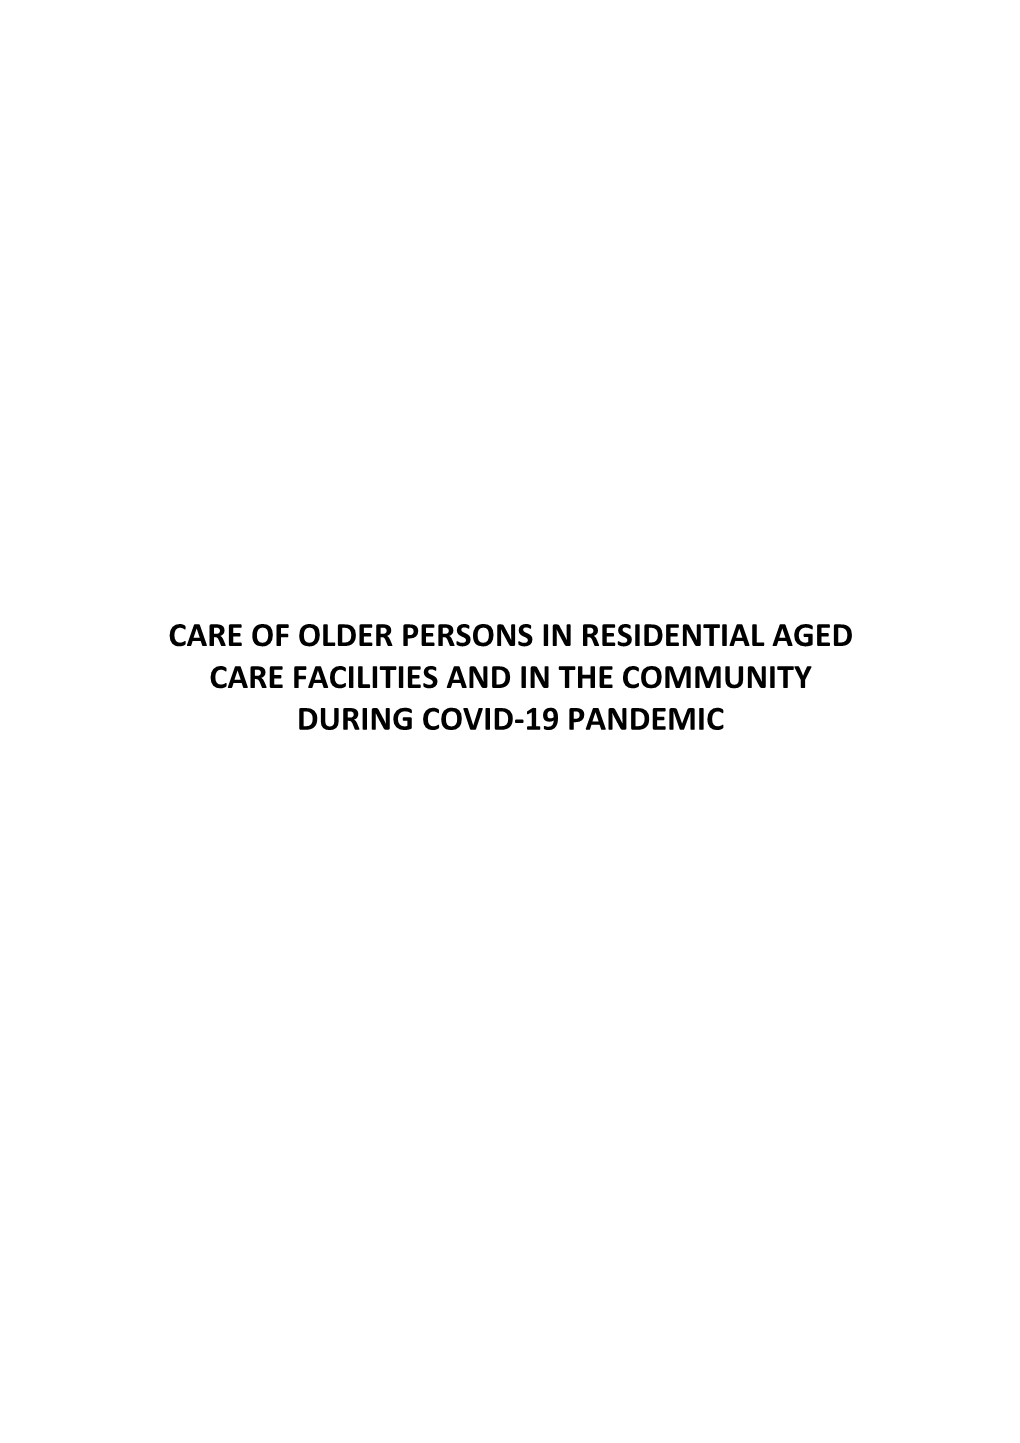 Care of Older Persons in Residential Aged Care Facilities and in the Community During Covid-19 Pandemic